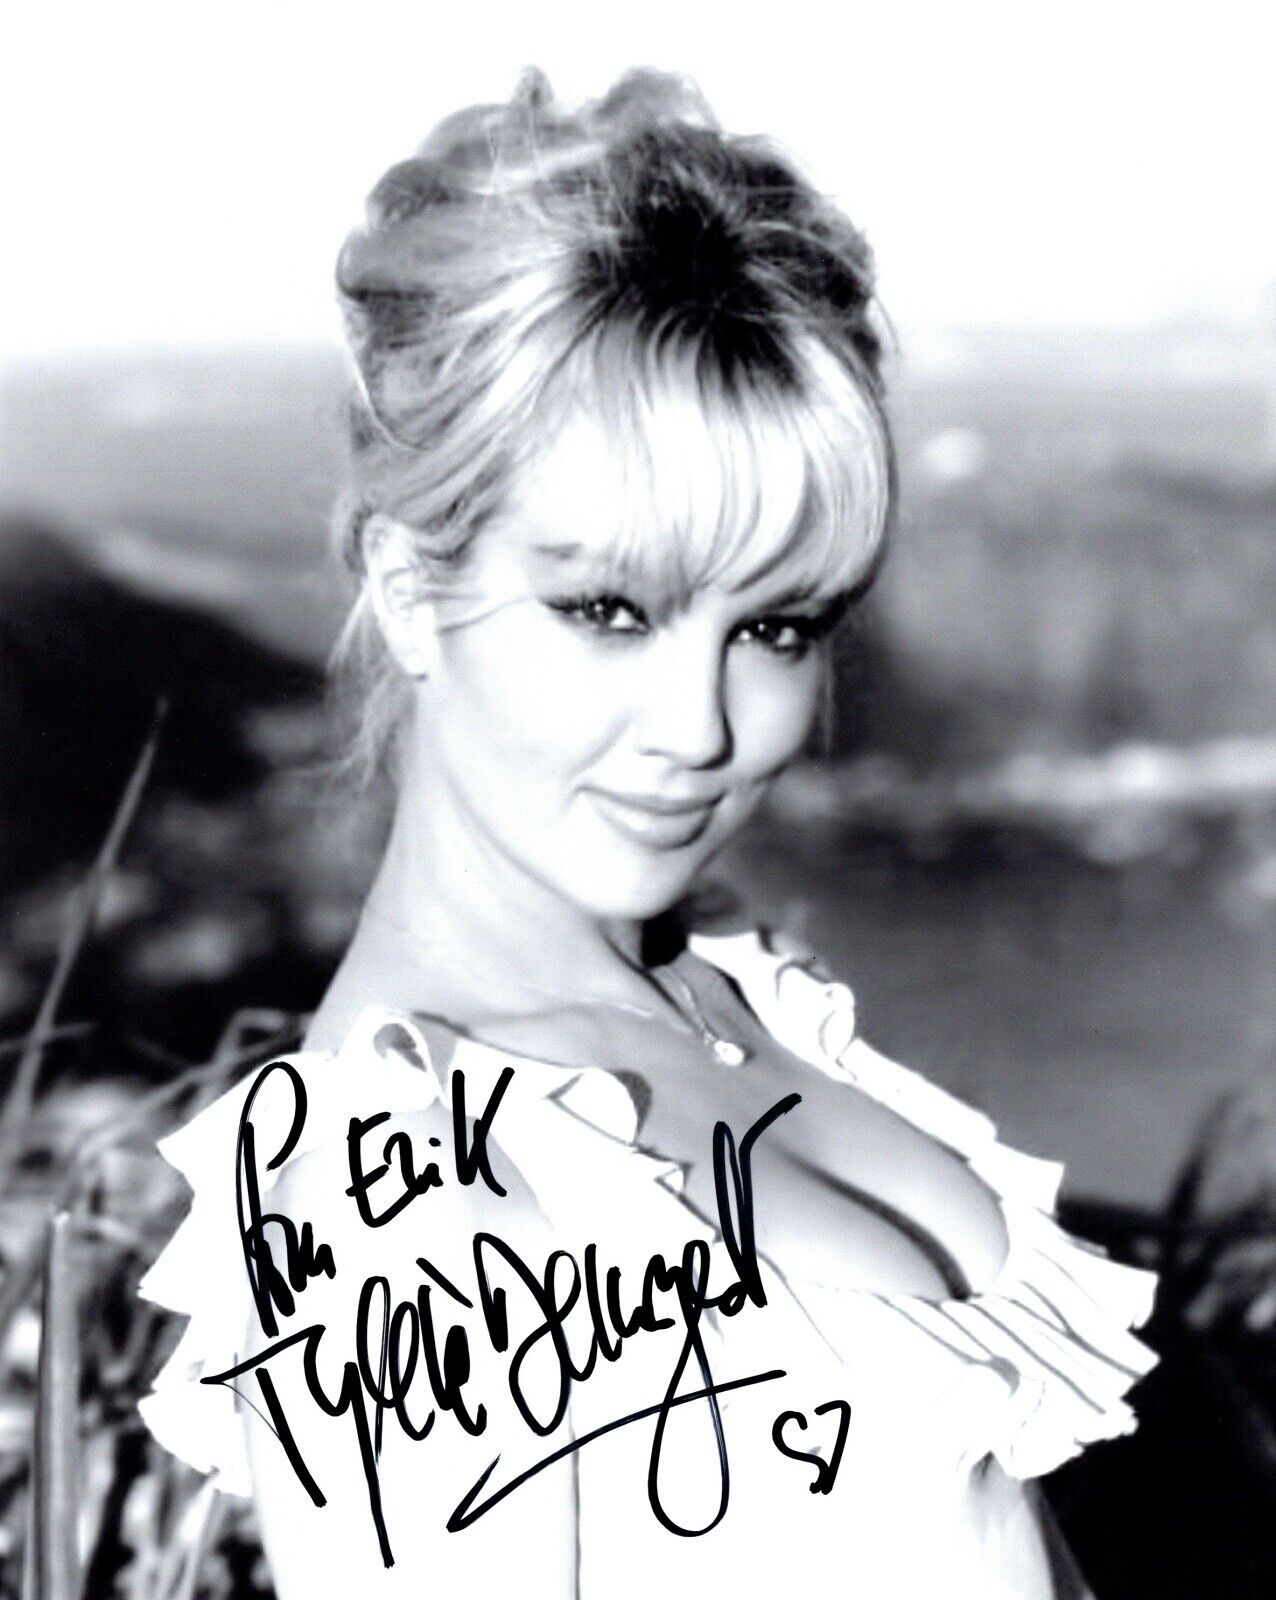 TO ERIC - Mylene Demongeot Signed - Autographed French Actress 8x10 inch Photo Poster painting